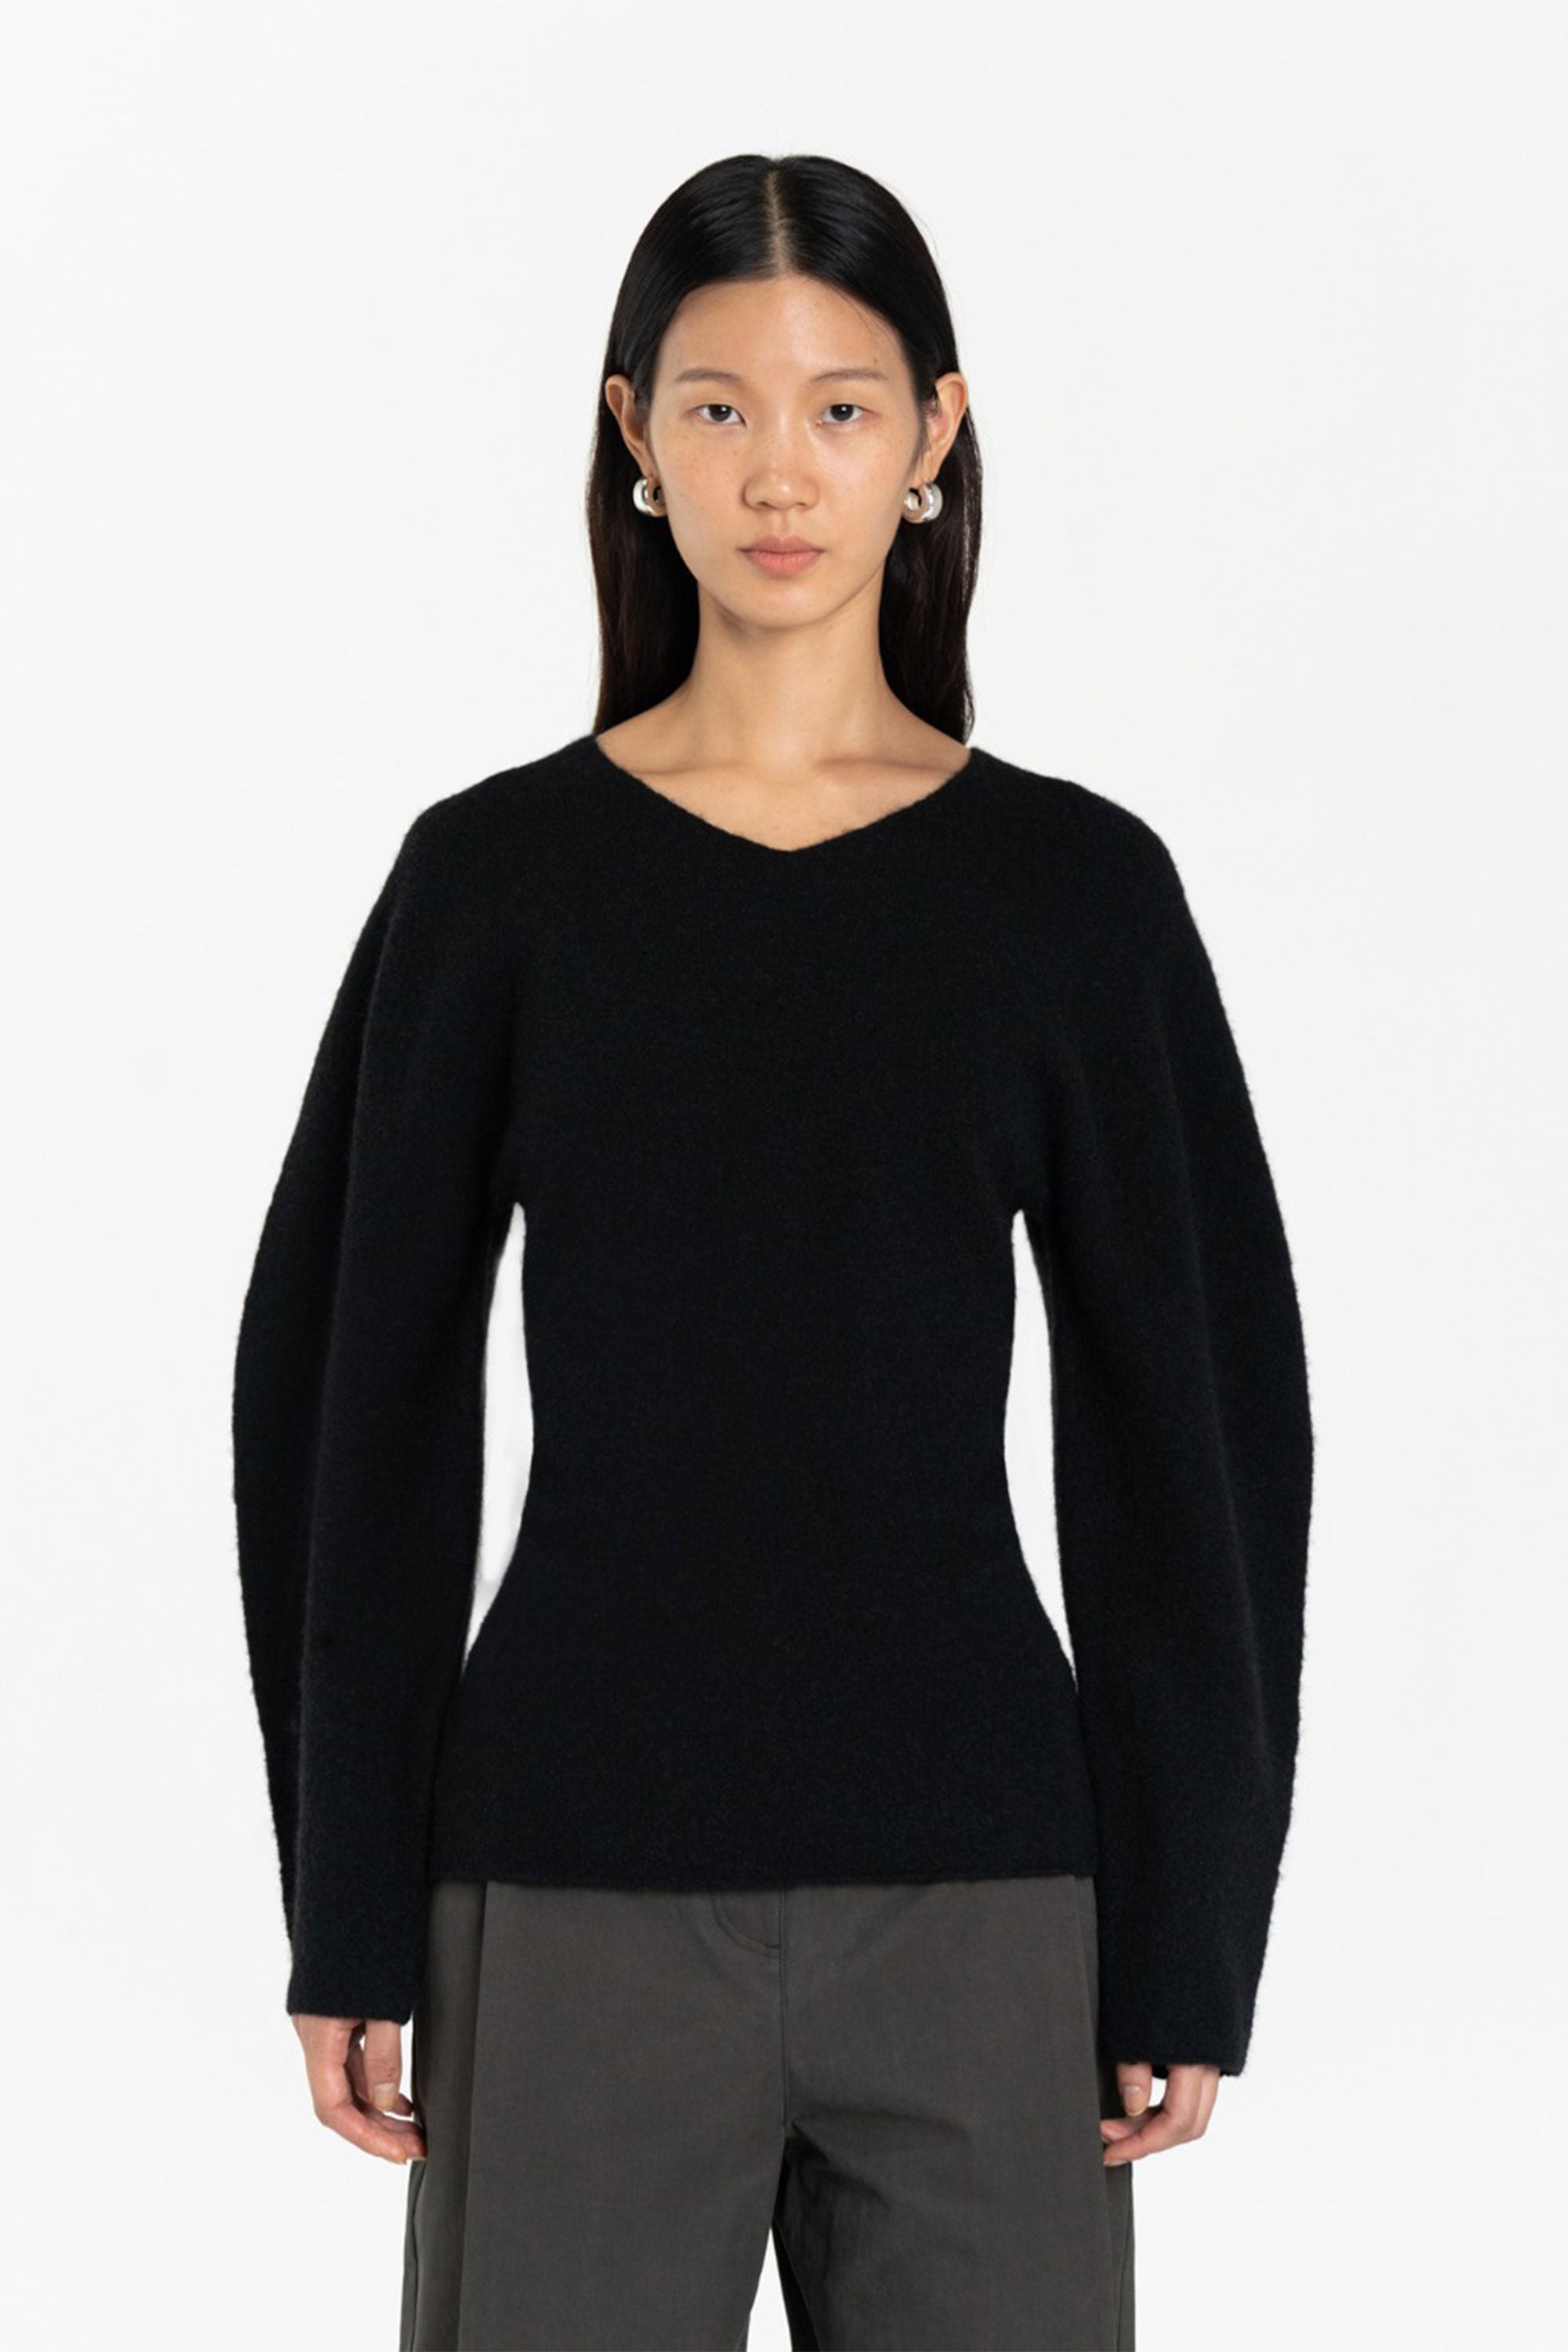 AMOMENTO Hourglass Whole Garment Knit Top | Knitwear | OEUVR